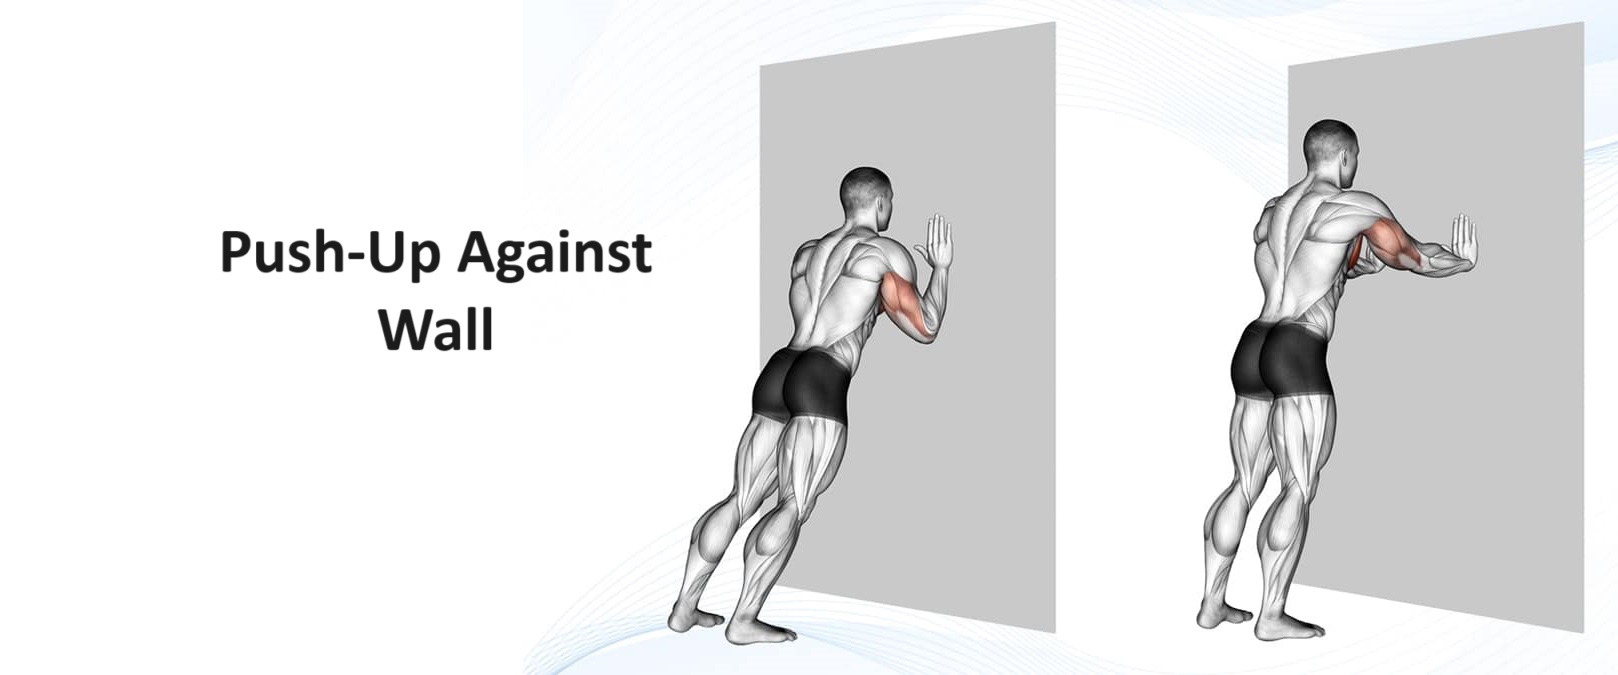 Push-Up Against Wall